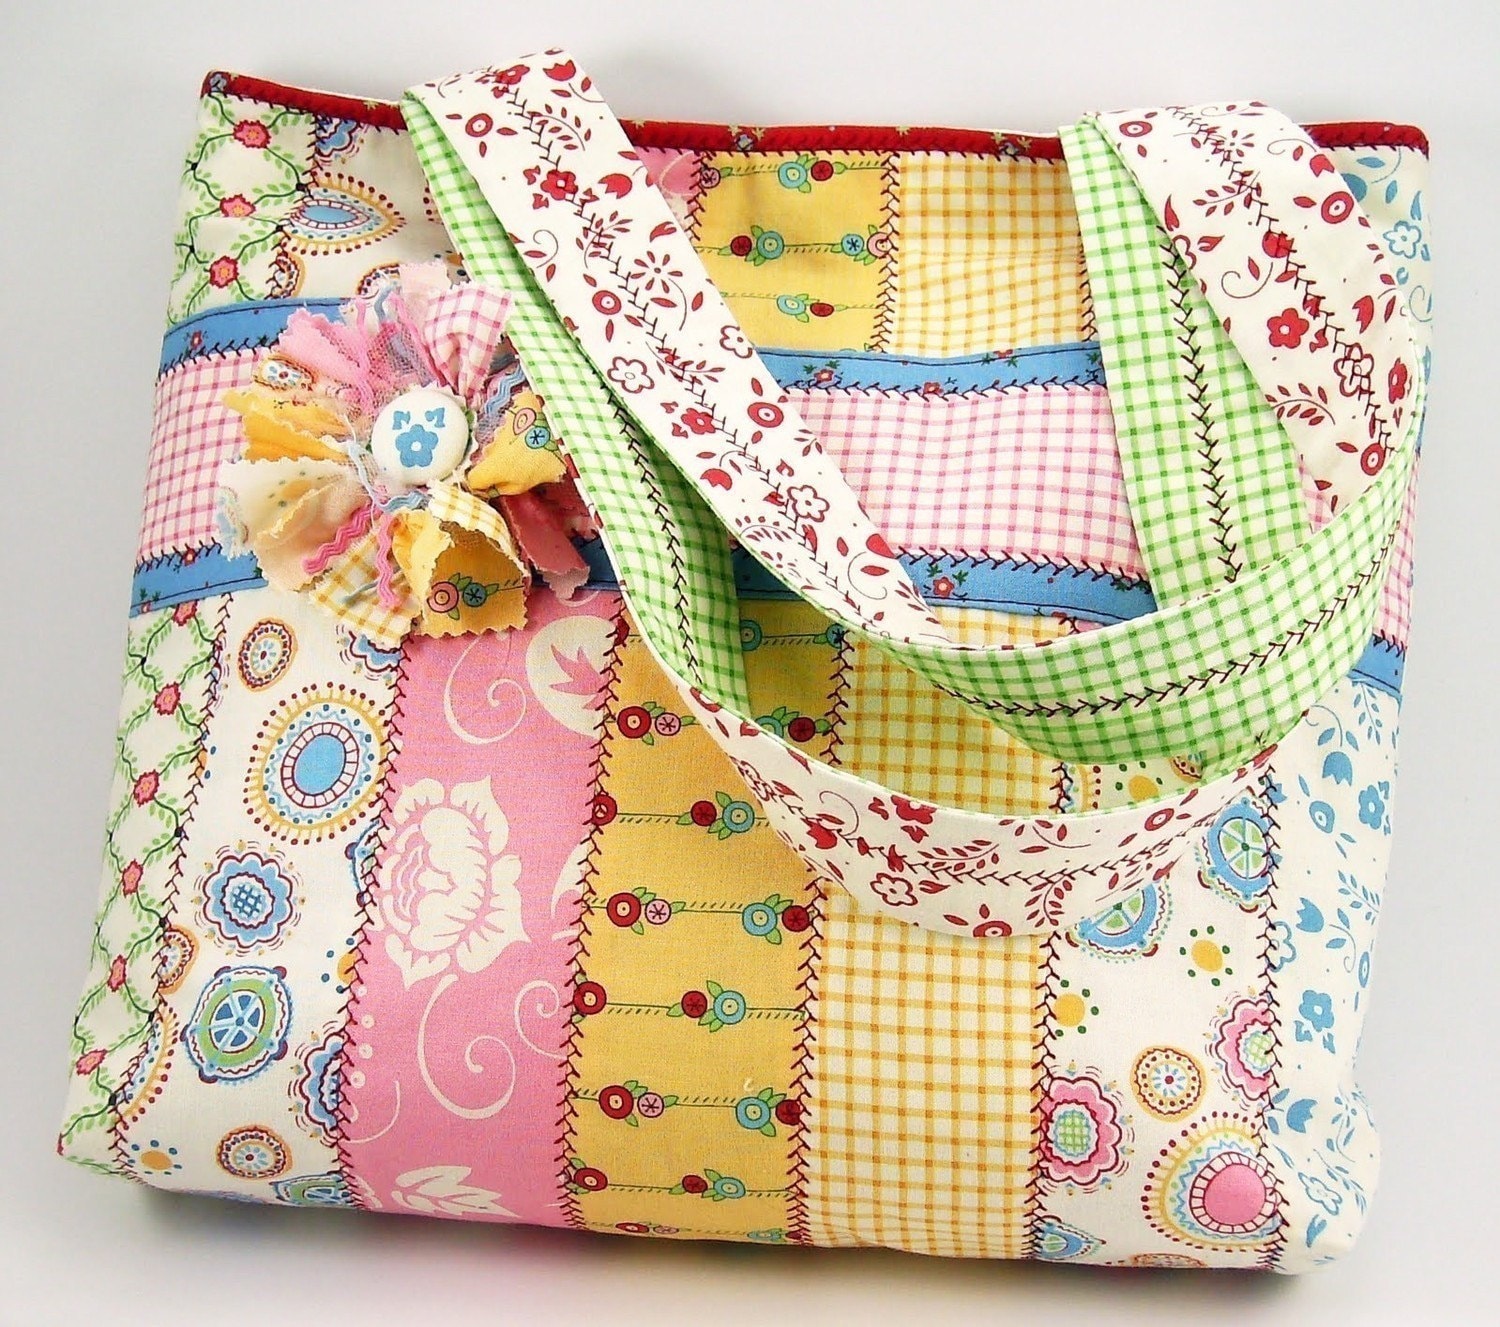 Chicken Boots Project Bag by Sew Sew Patterns